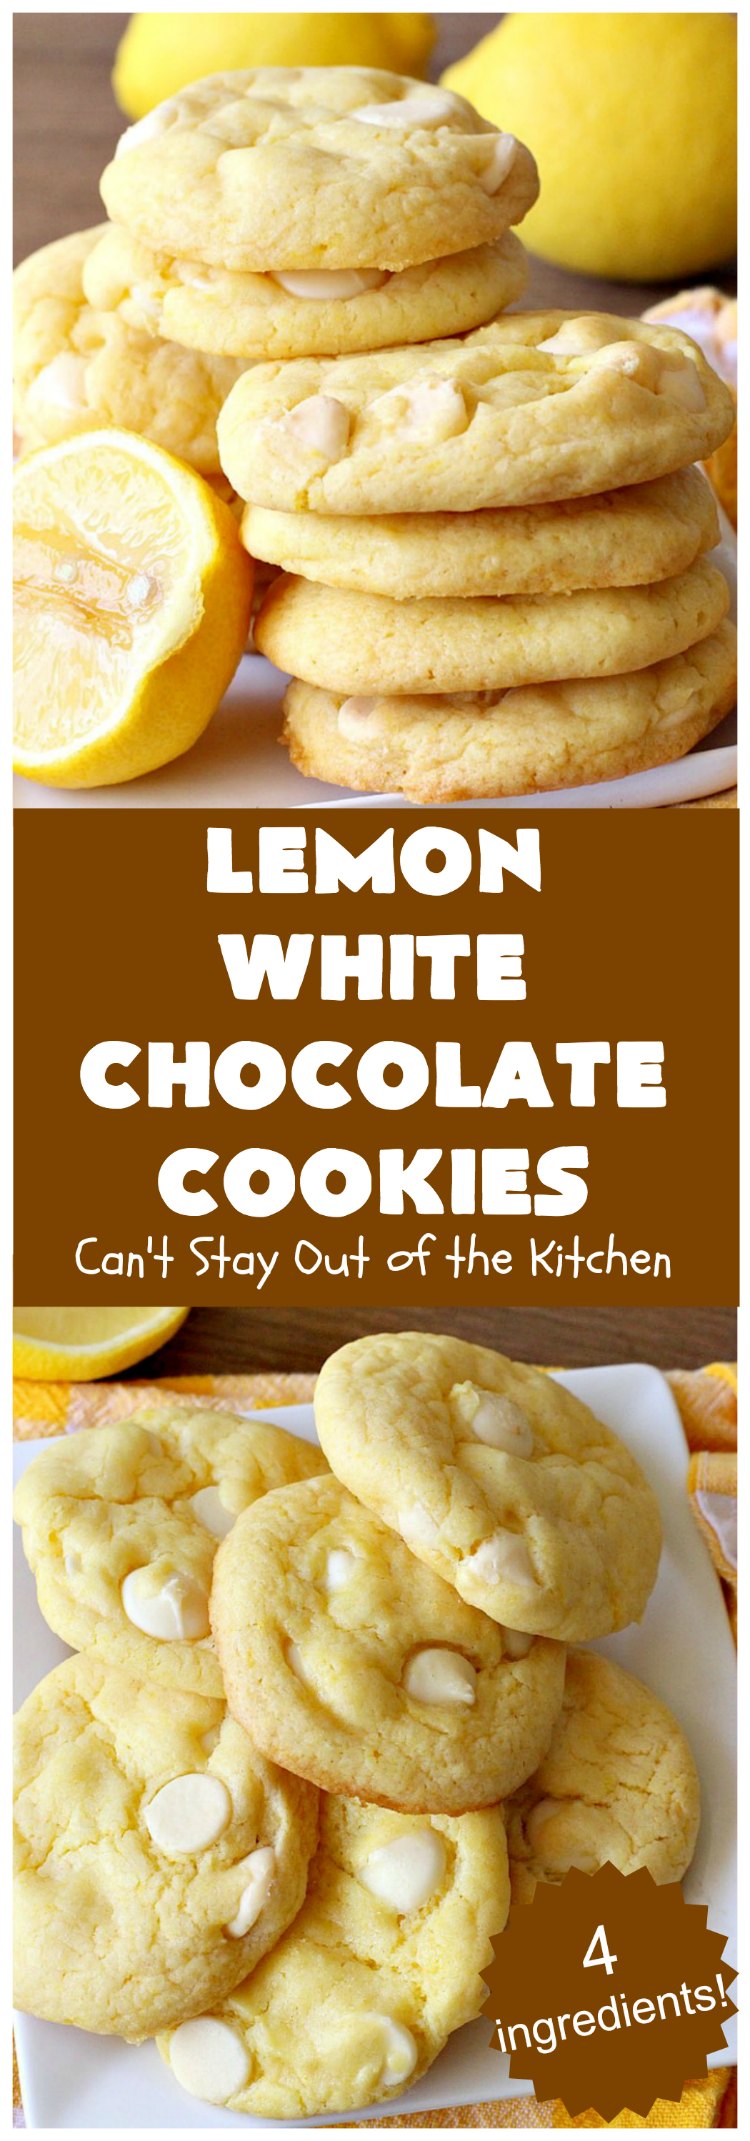 Lemon White Chocolate Cookies | Can't Stay Out of the Kitchen